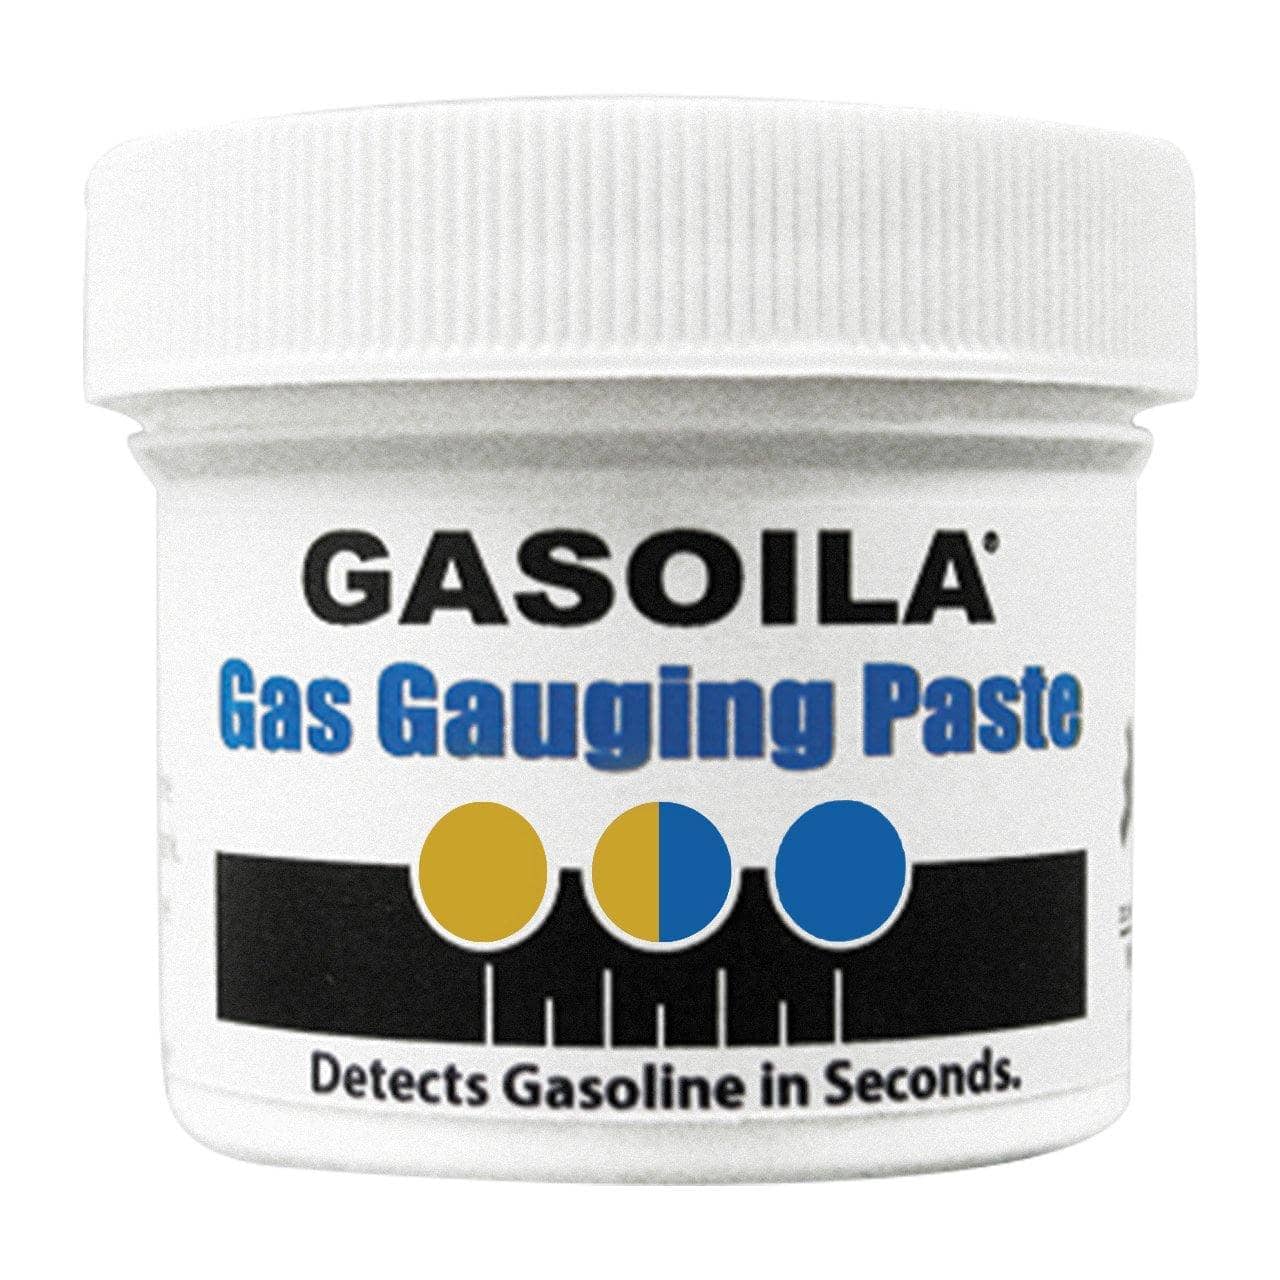 GASOILA - 2.5 oz Container Gas Gauging Paste - Becker Safety and Supply